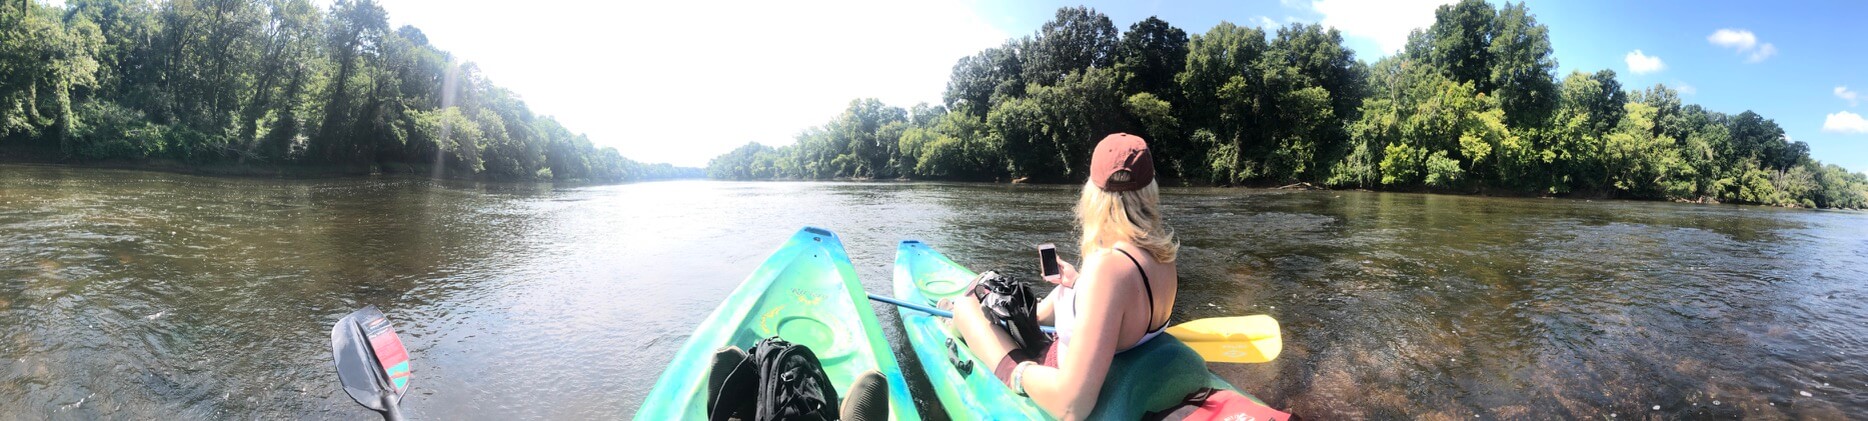 My wife and I kayaking earlier this year